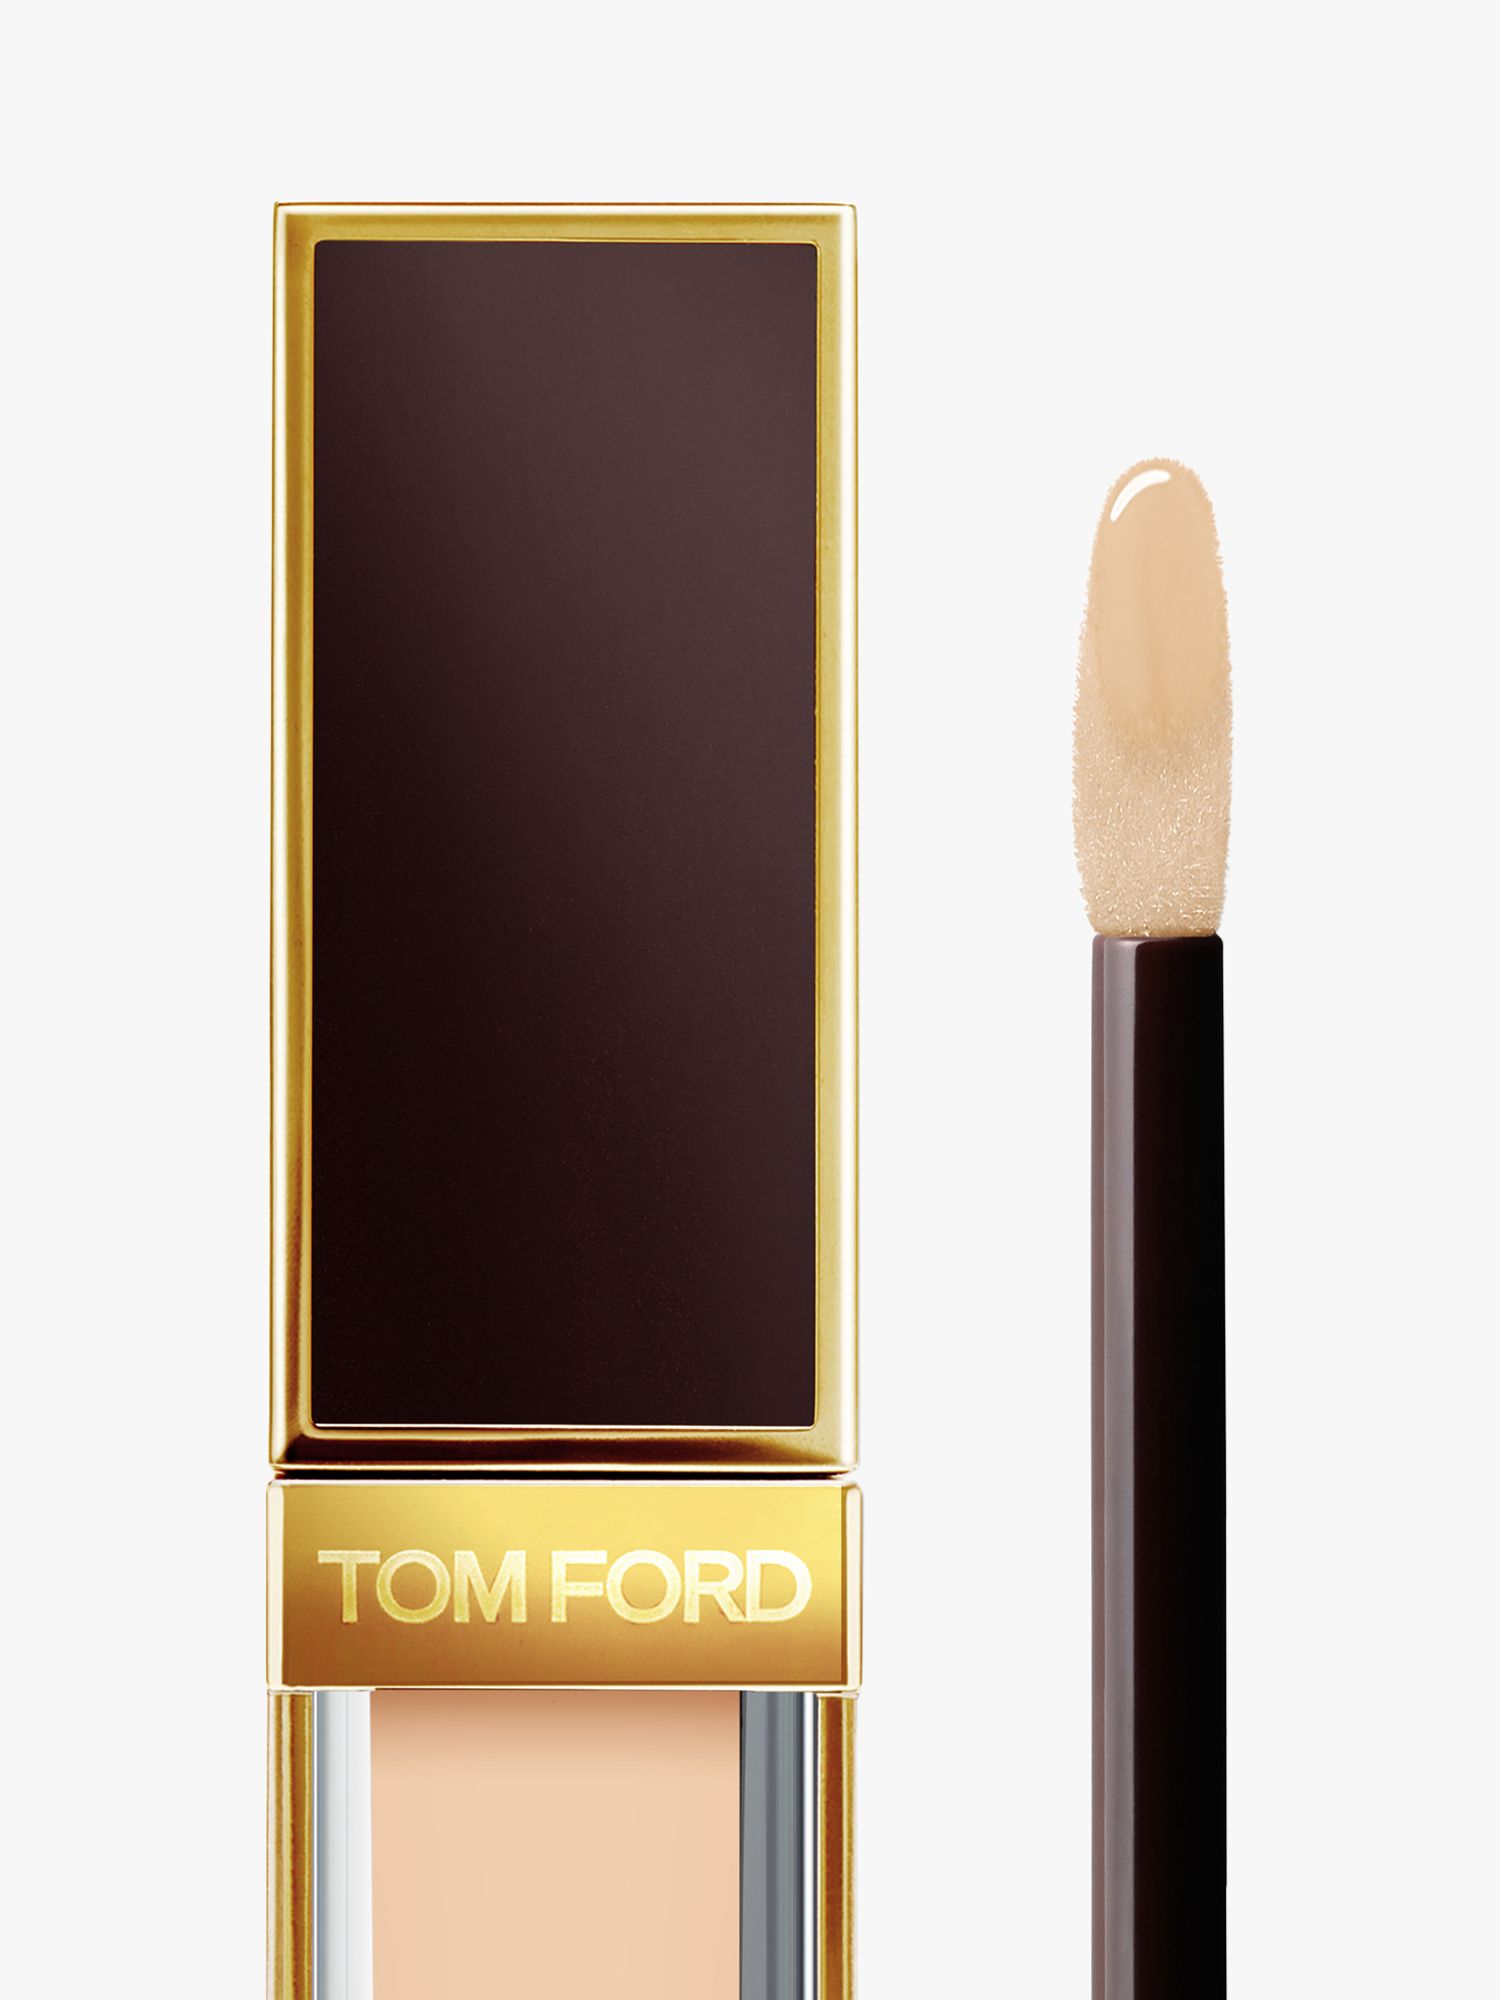 TOM FORD Shade & Illuminate Concealer, 0W0 Shell 3